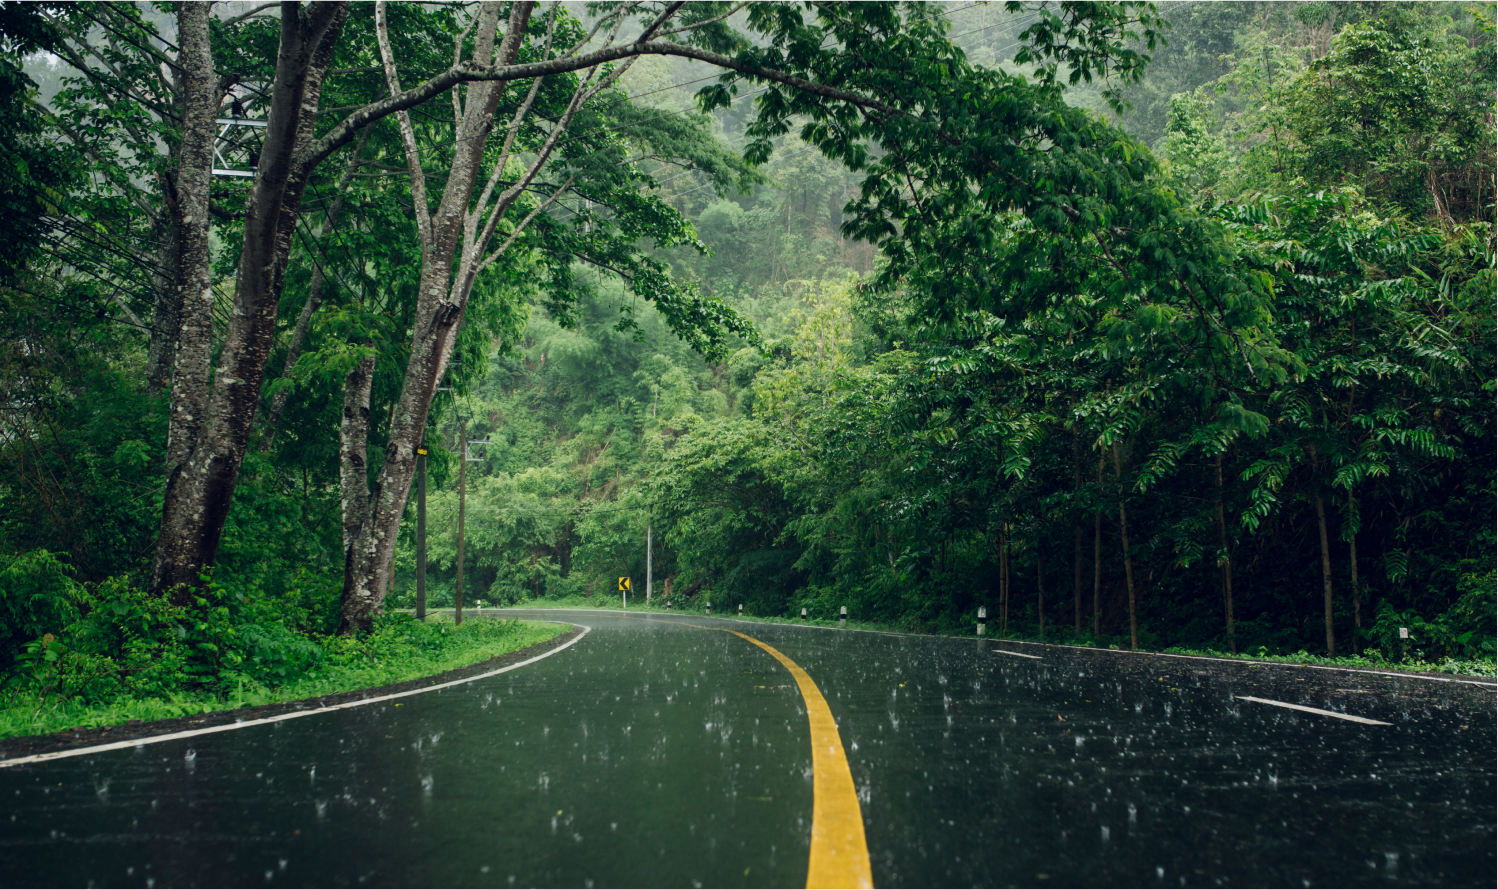 A rain-slicked road curves to the left in a forest.